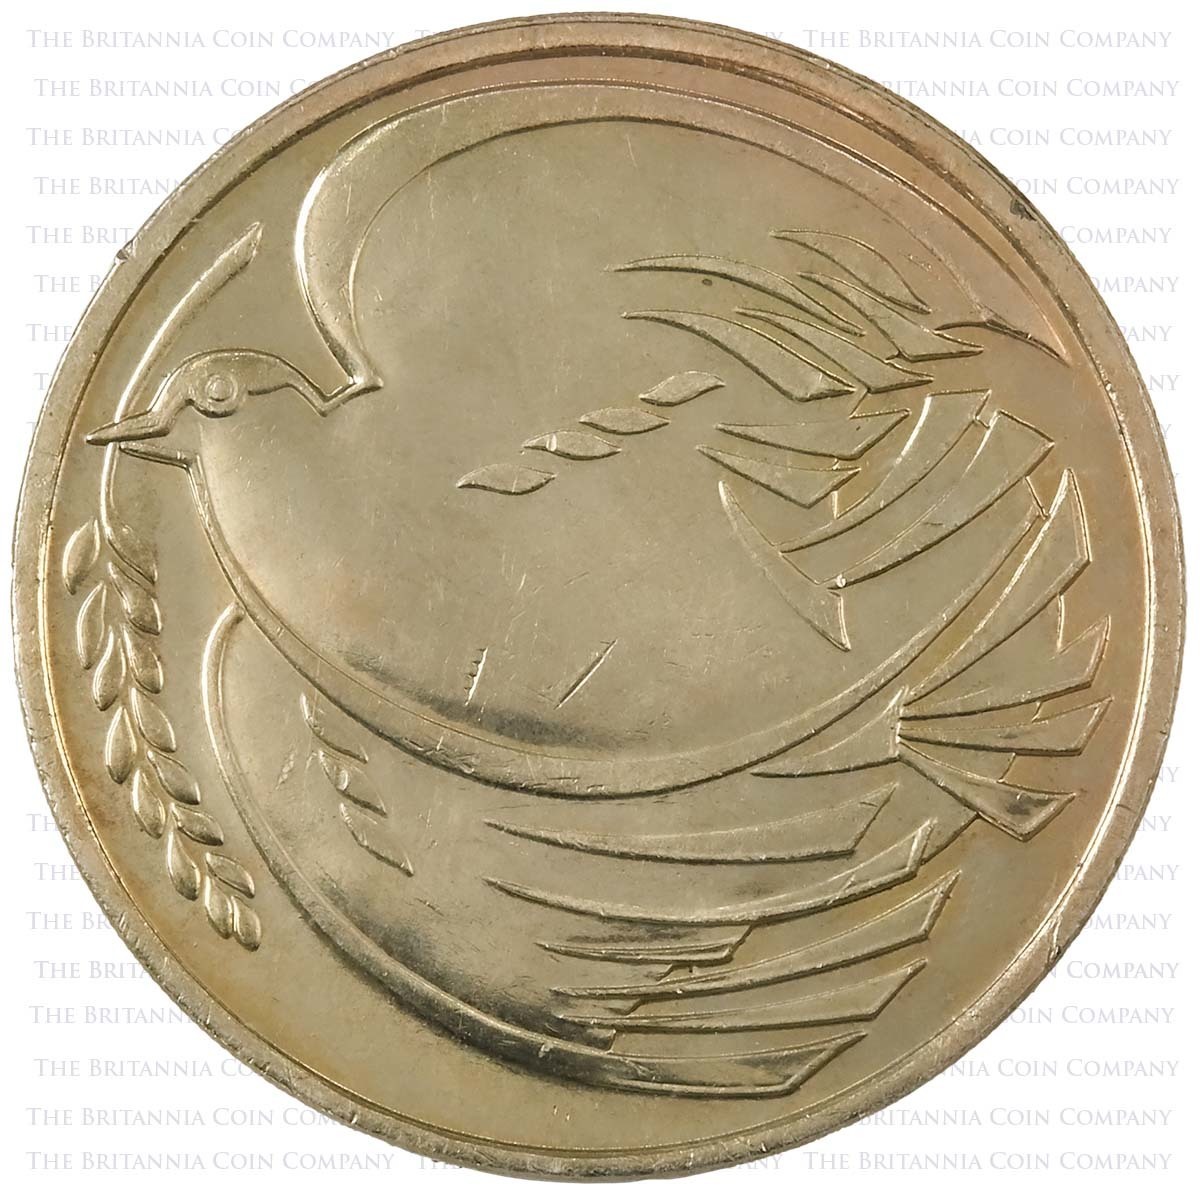 This 1995 £2 was issued by The Royal Mint to mark fifty years since the end of the Second World War. John Mill's iconic design symbolises peace, showing a dove carryign an olive branch in its beak. Interestingly, this coin is only dated on its edge which 